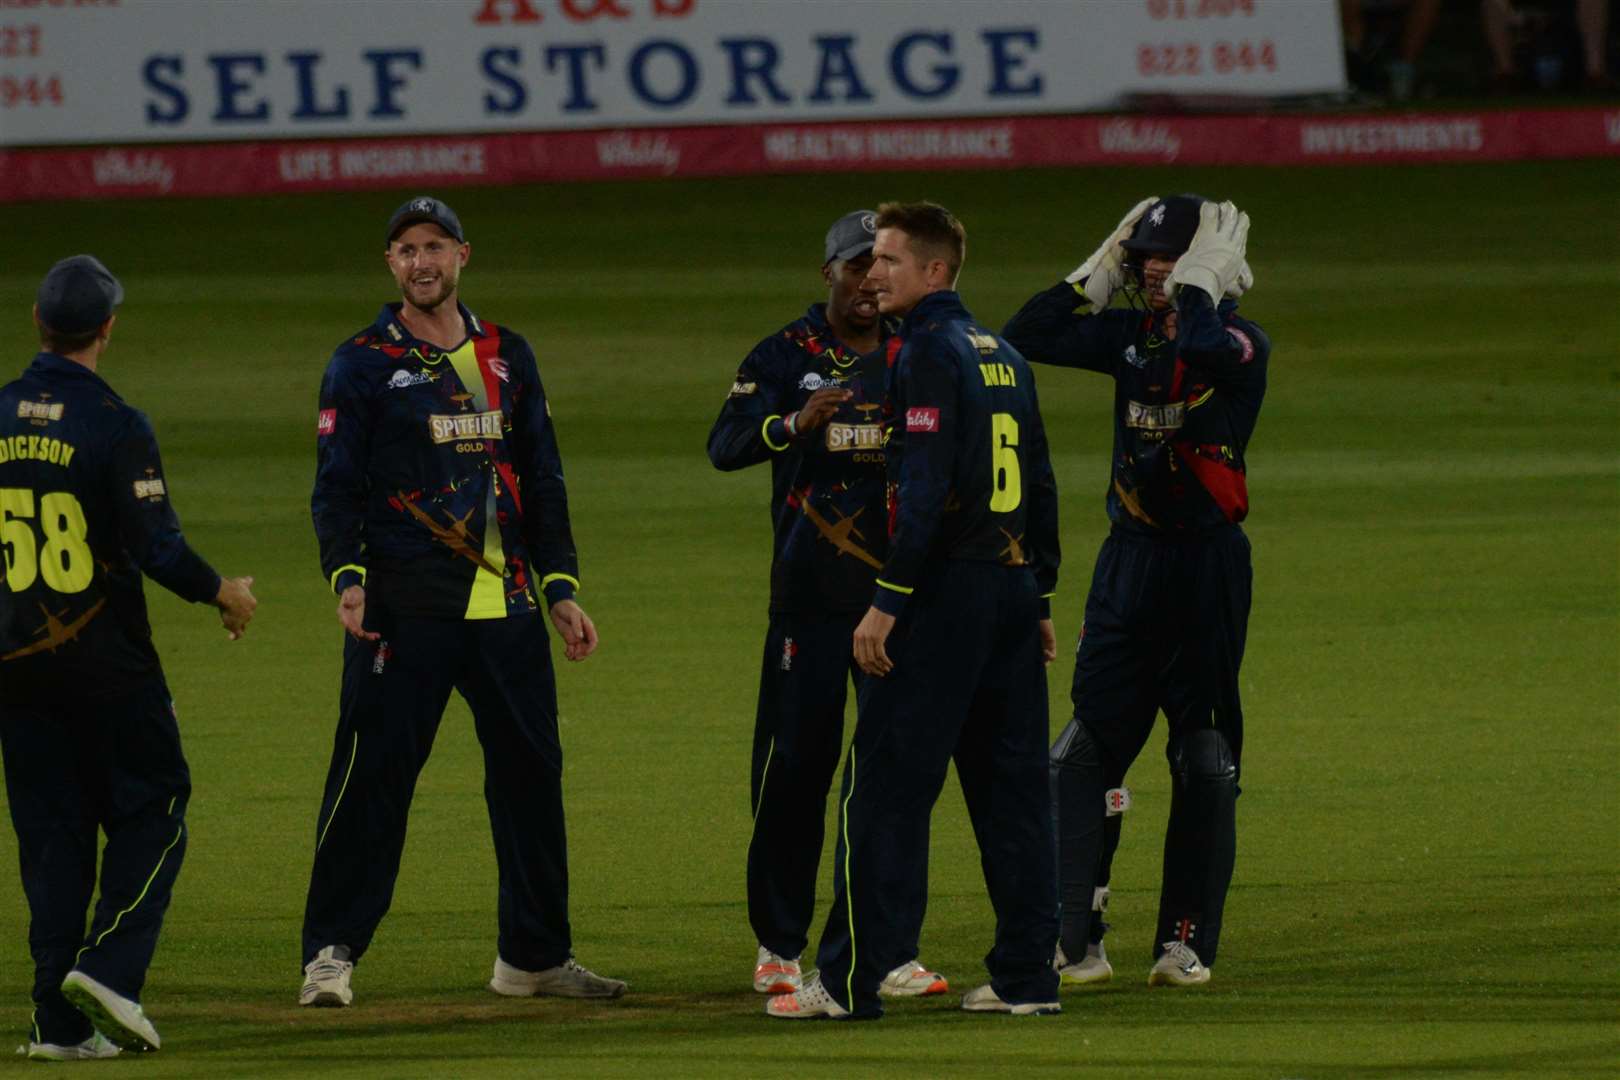 Kent celebrate an early wicket from Joe Denly. Picture: Chris Davey.